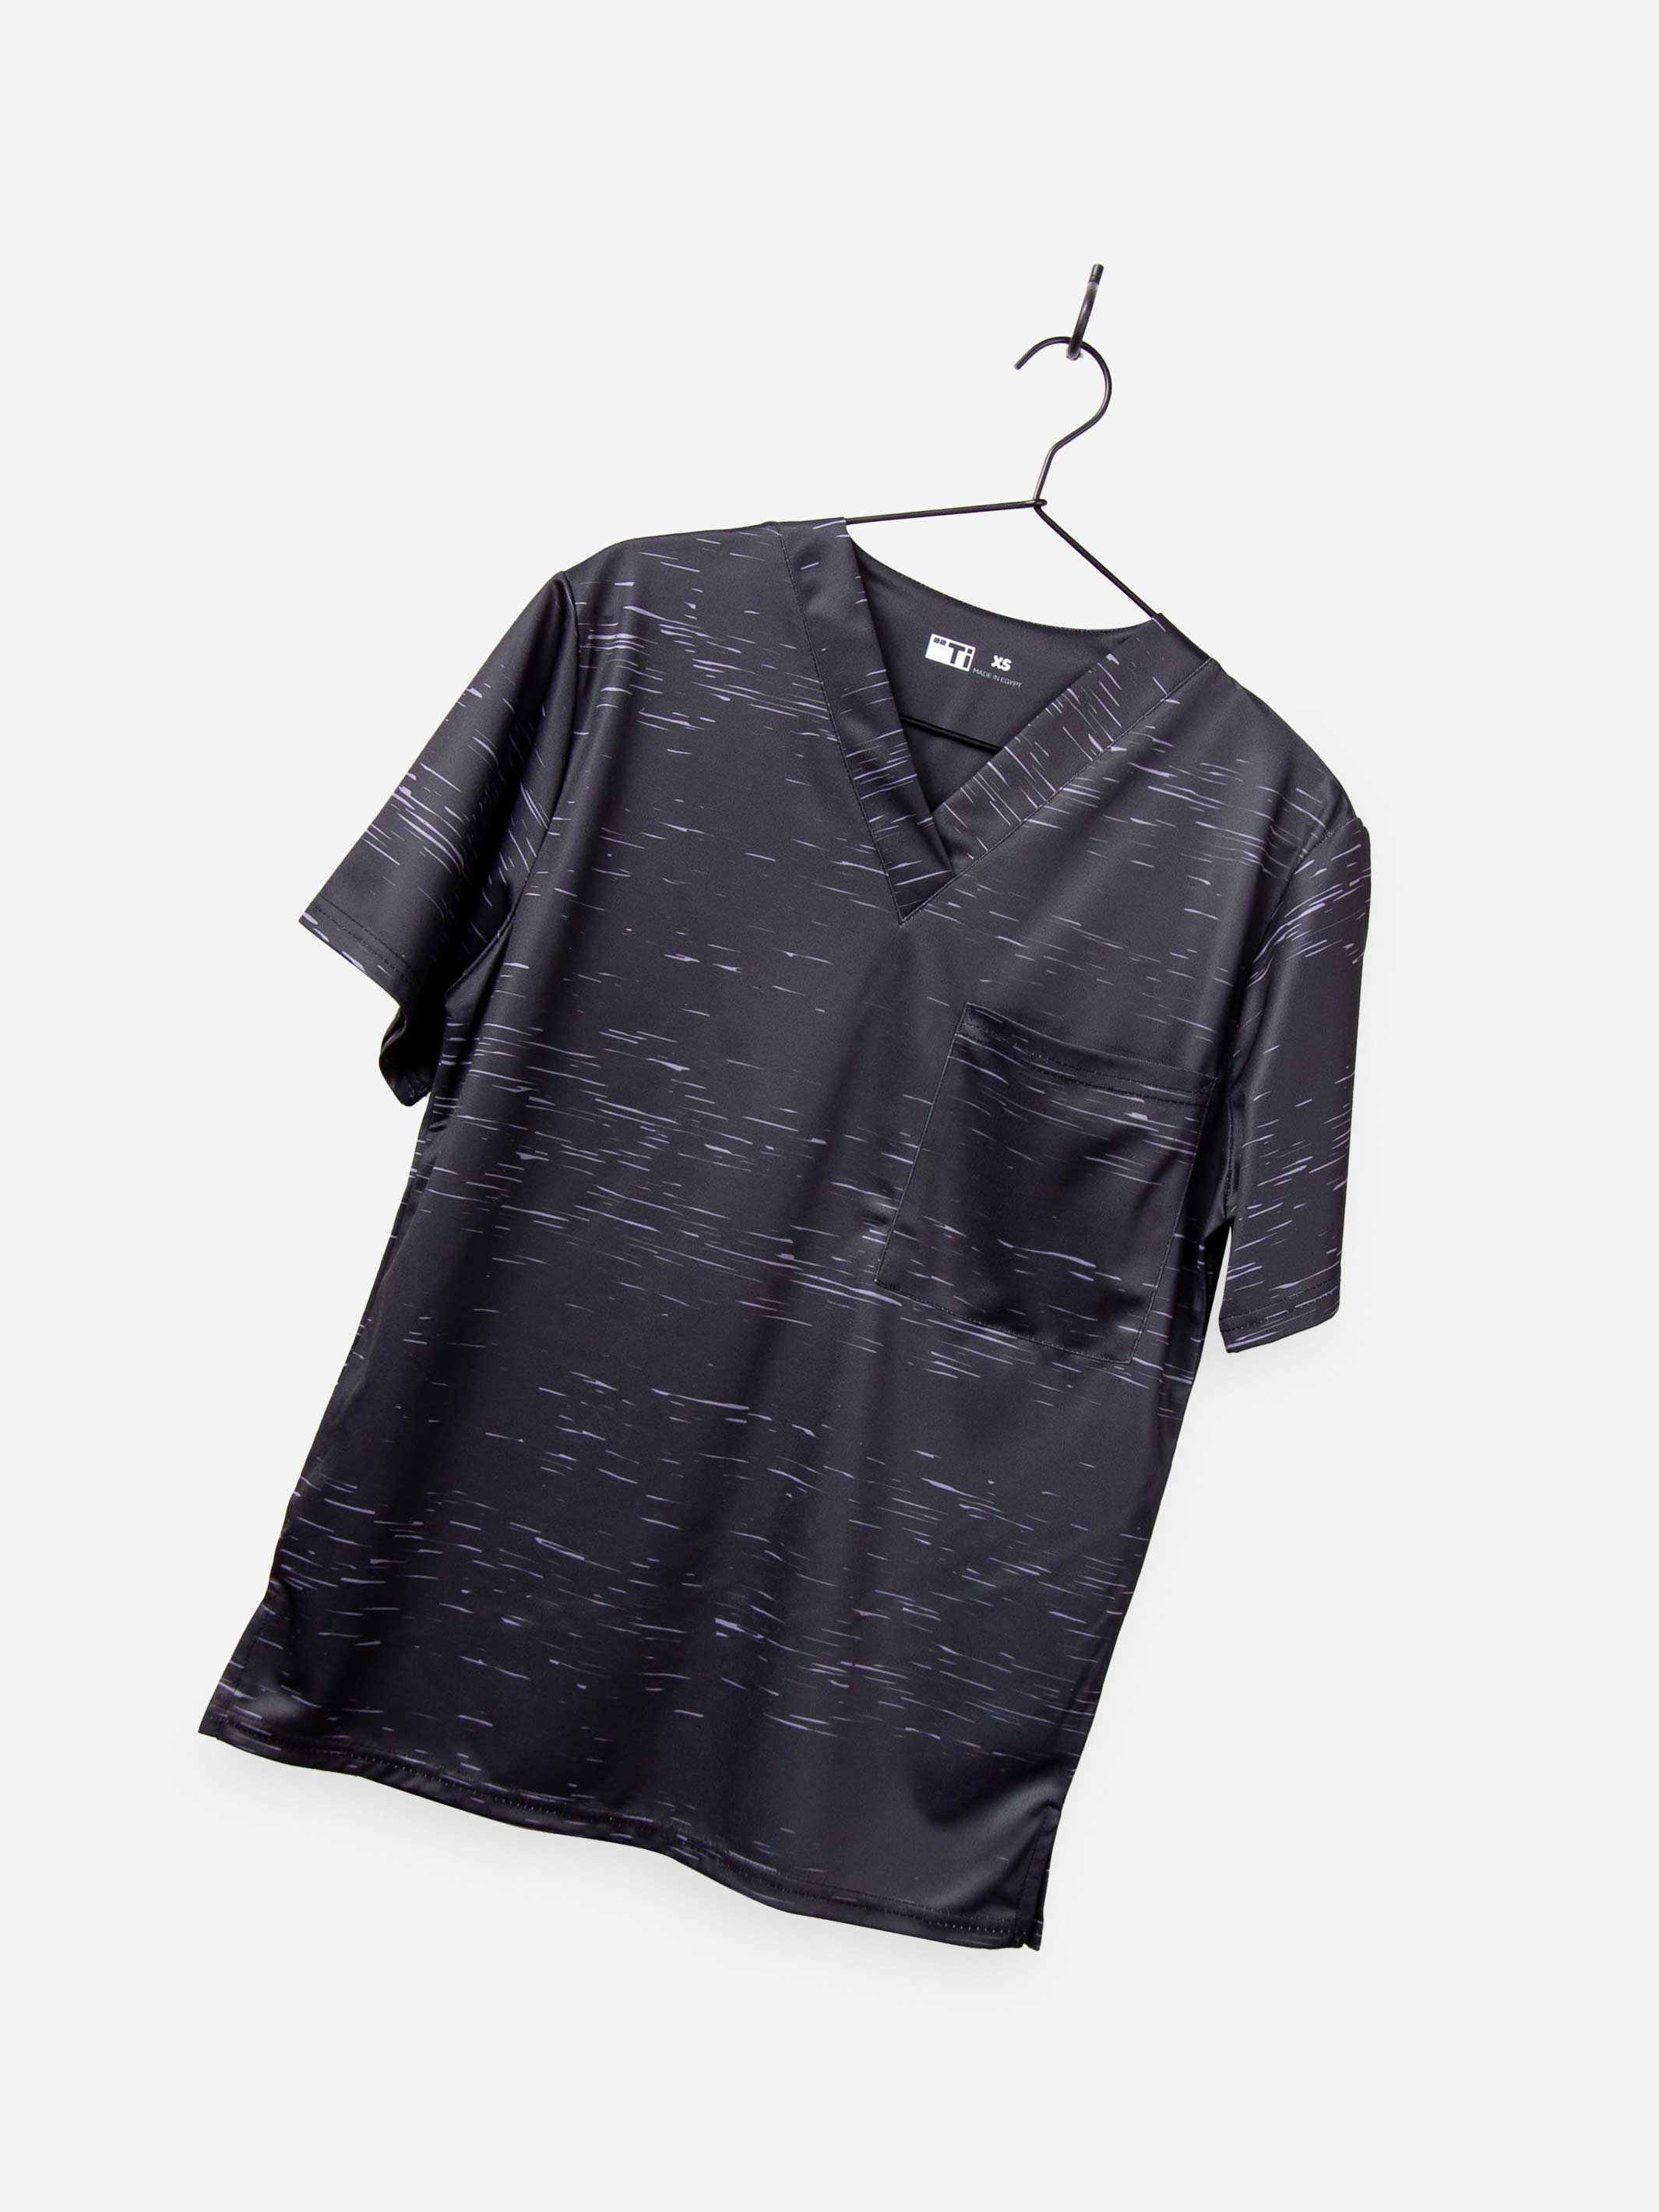 Men&#39;s Cool Print Scrub Top with Athletic Stripes and Static in Black performance fabric